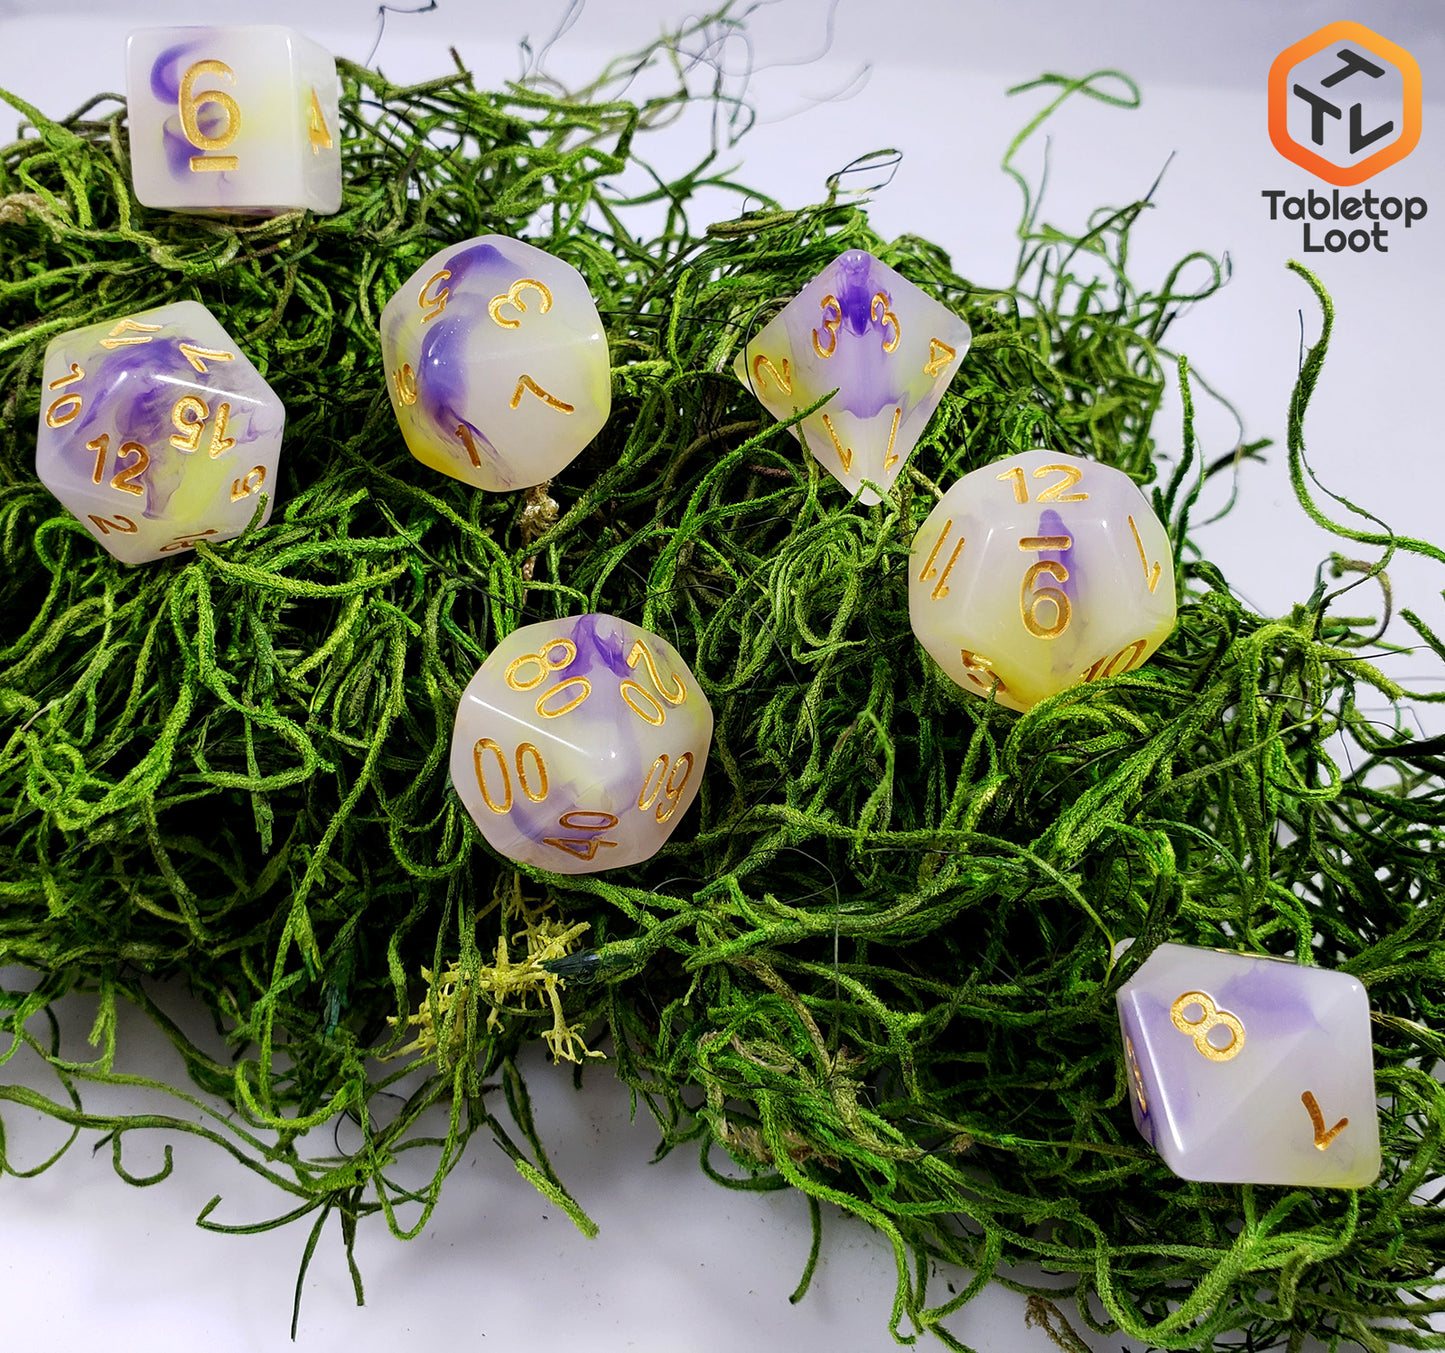 The Fields of Wildflowers 7 piece dice set from Tabletop Loot with swirls of purple and yellow in a milky resin and gold numbering.